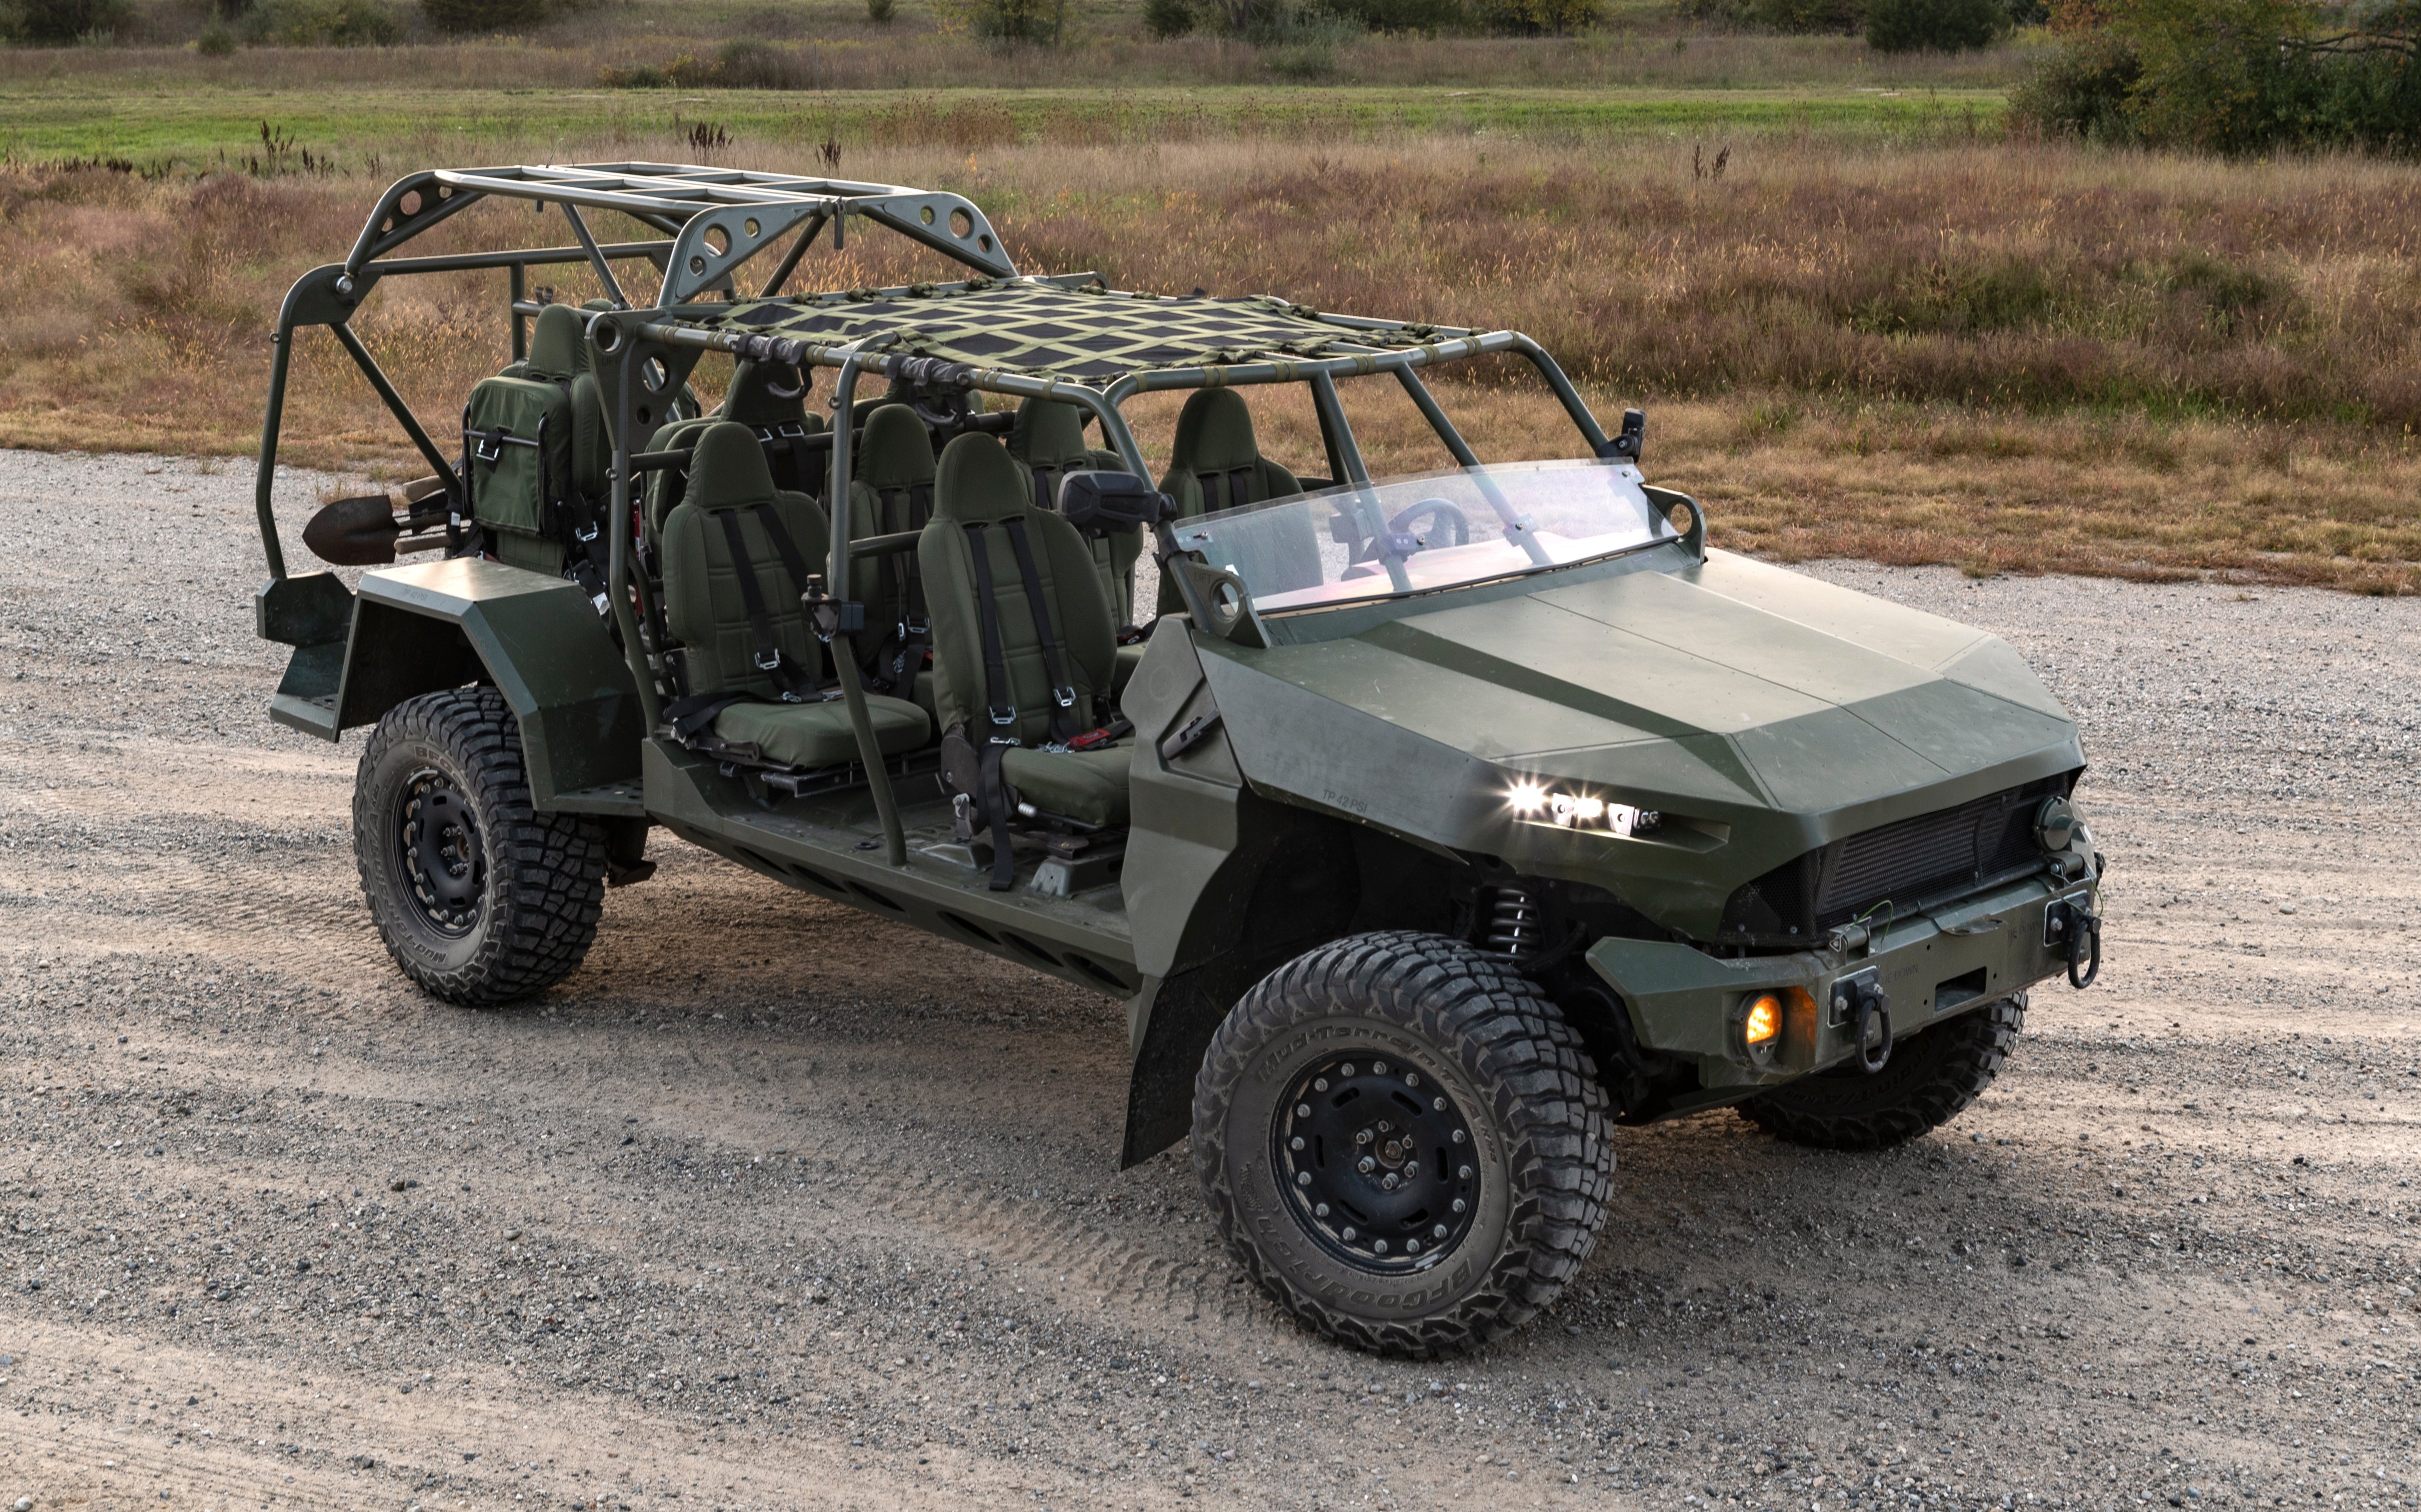 GM-Defense-has-brought-forward-capabilities-from-its-commercial-operations-for-the-Armys-Infantry-Squad-Vehicle